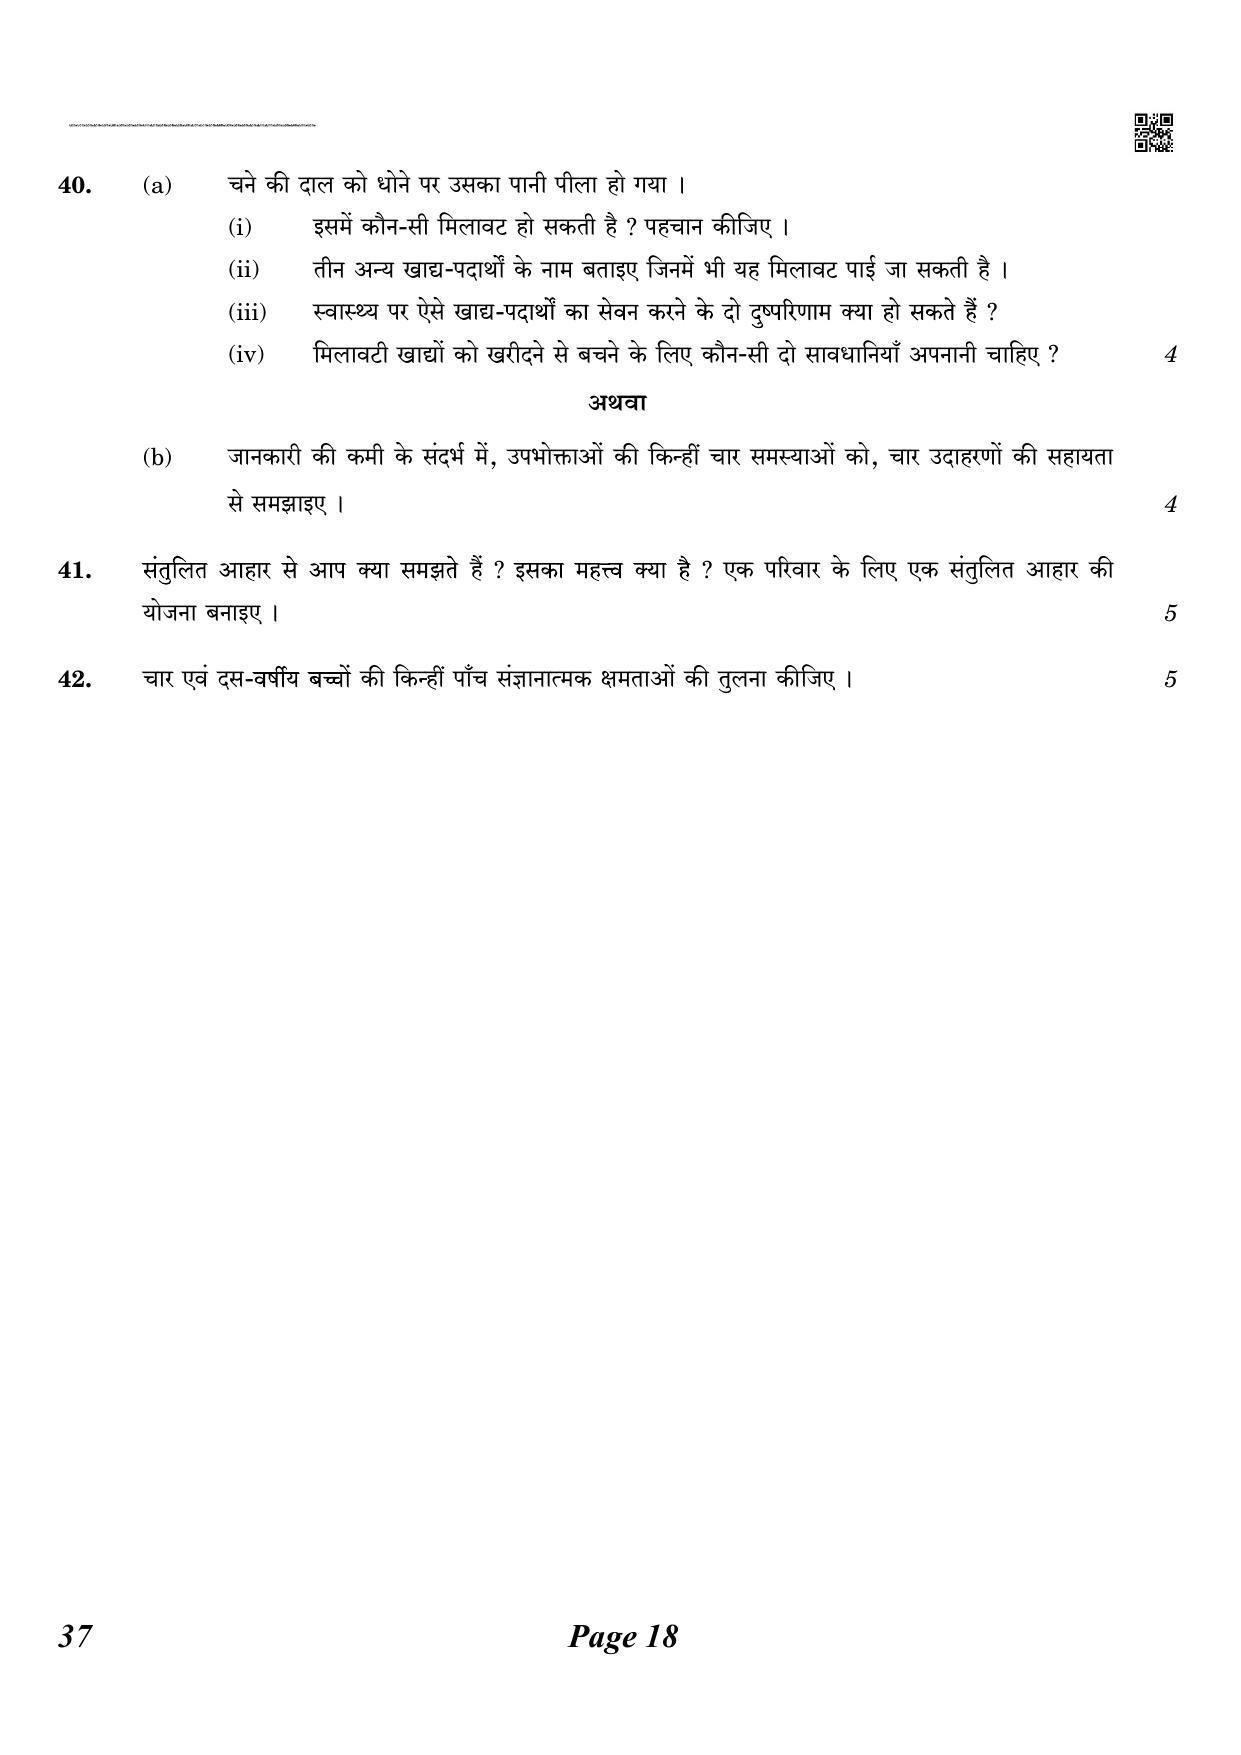 CBSE Class 10 QP_064_Home_Science 2021 Compartment Question Paper - Page 18